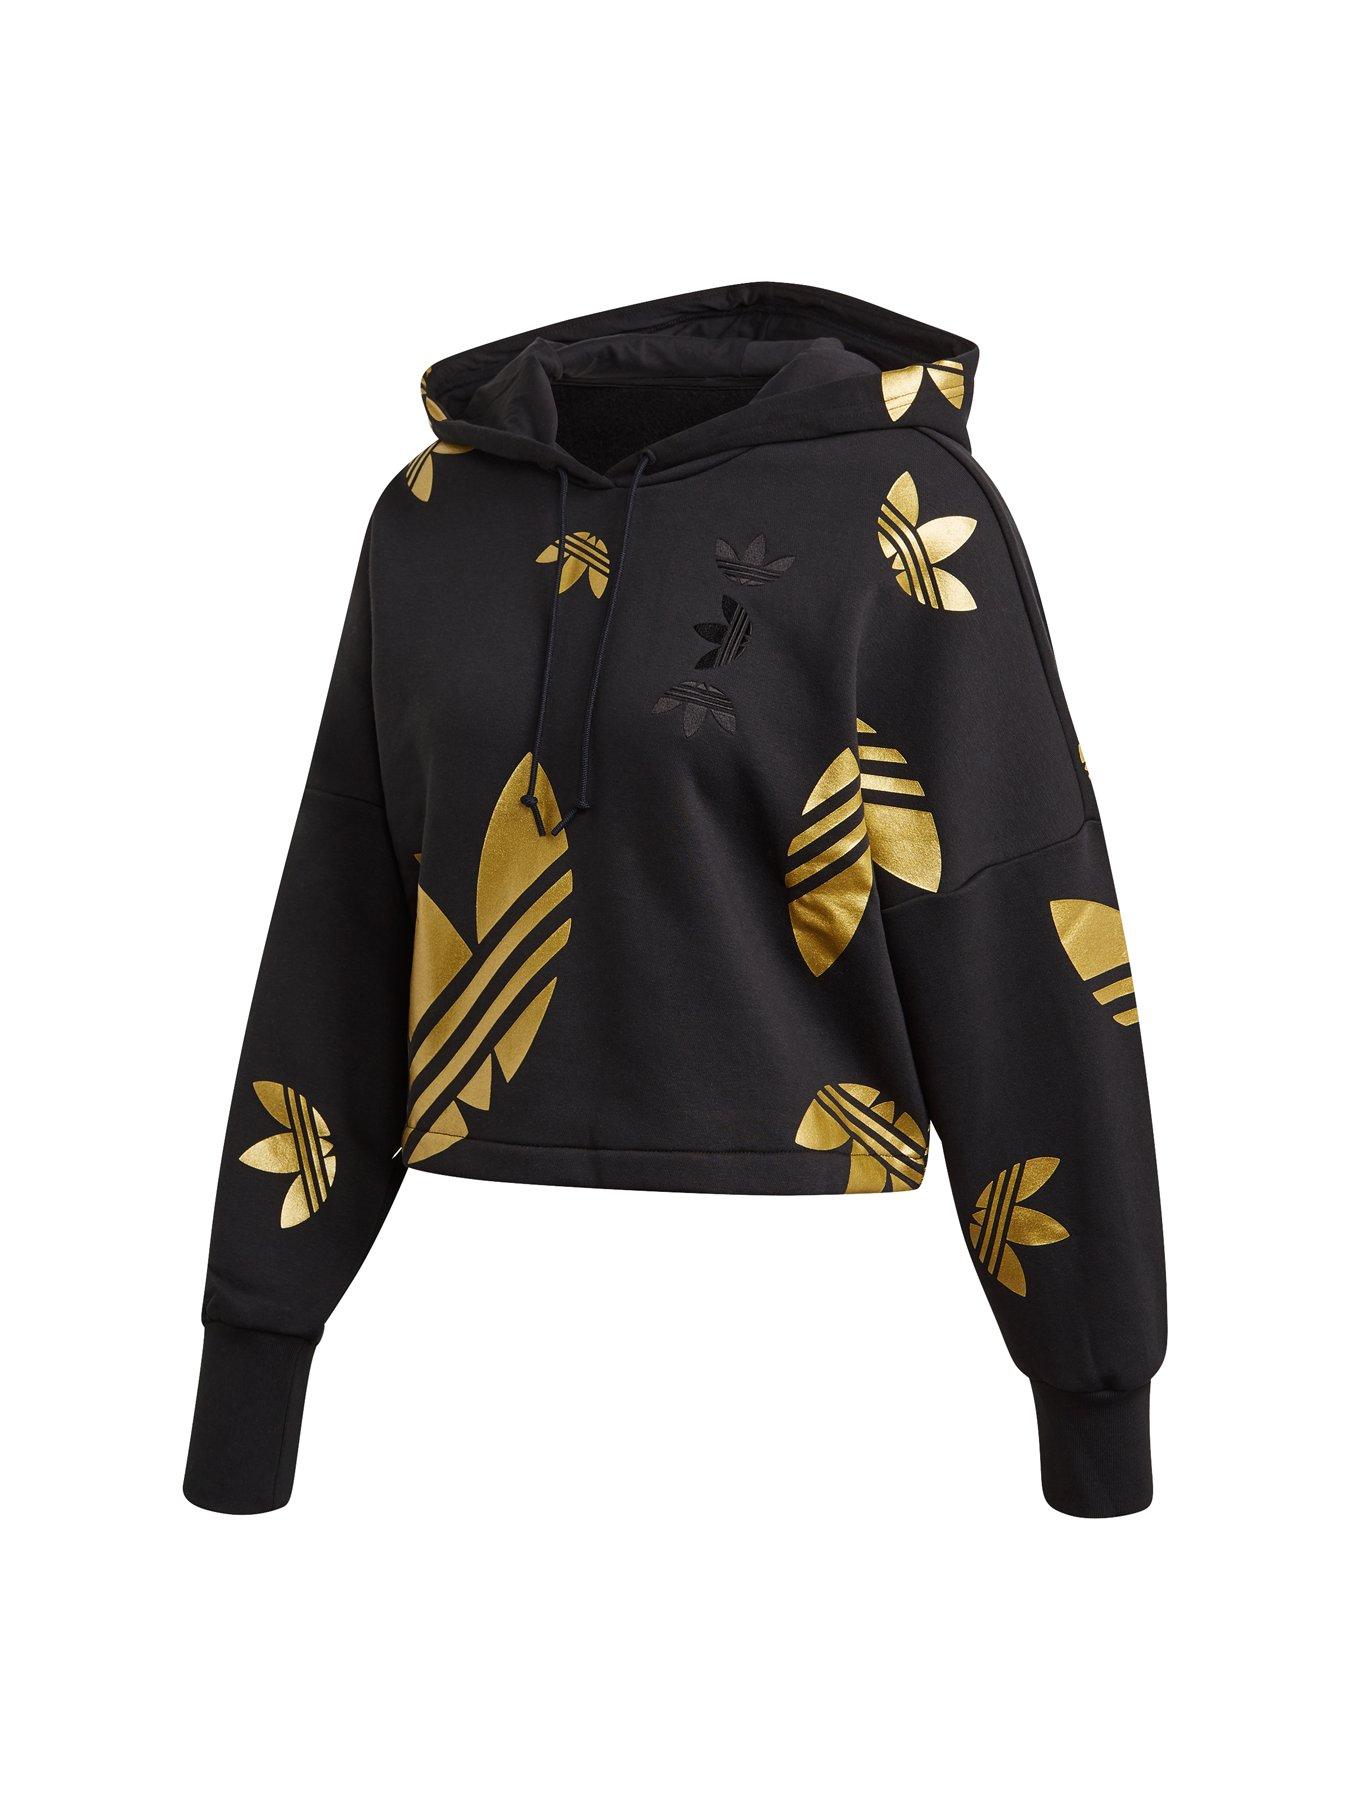 adidas hoodie with gold logo